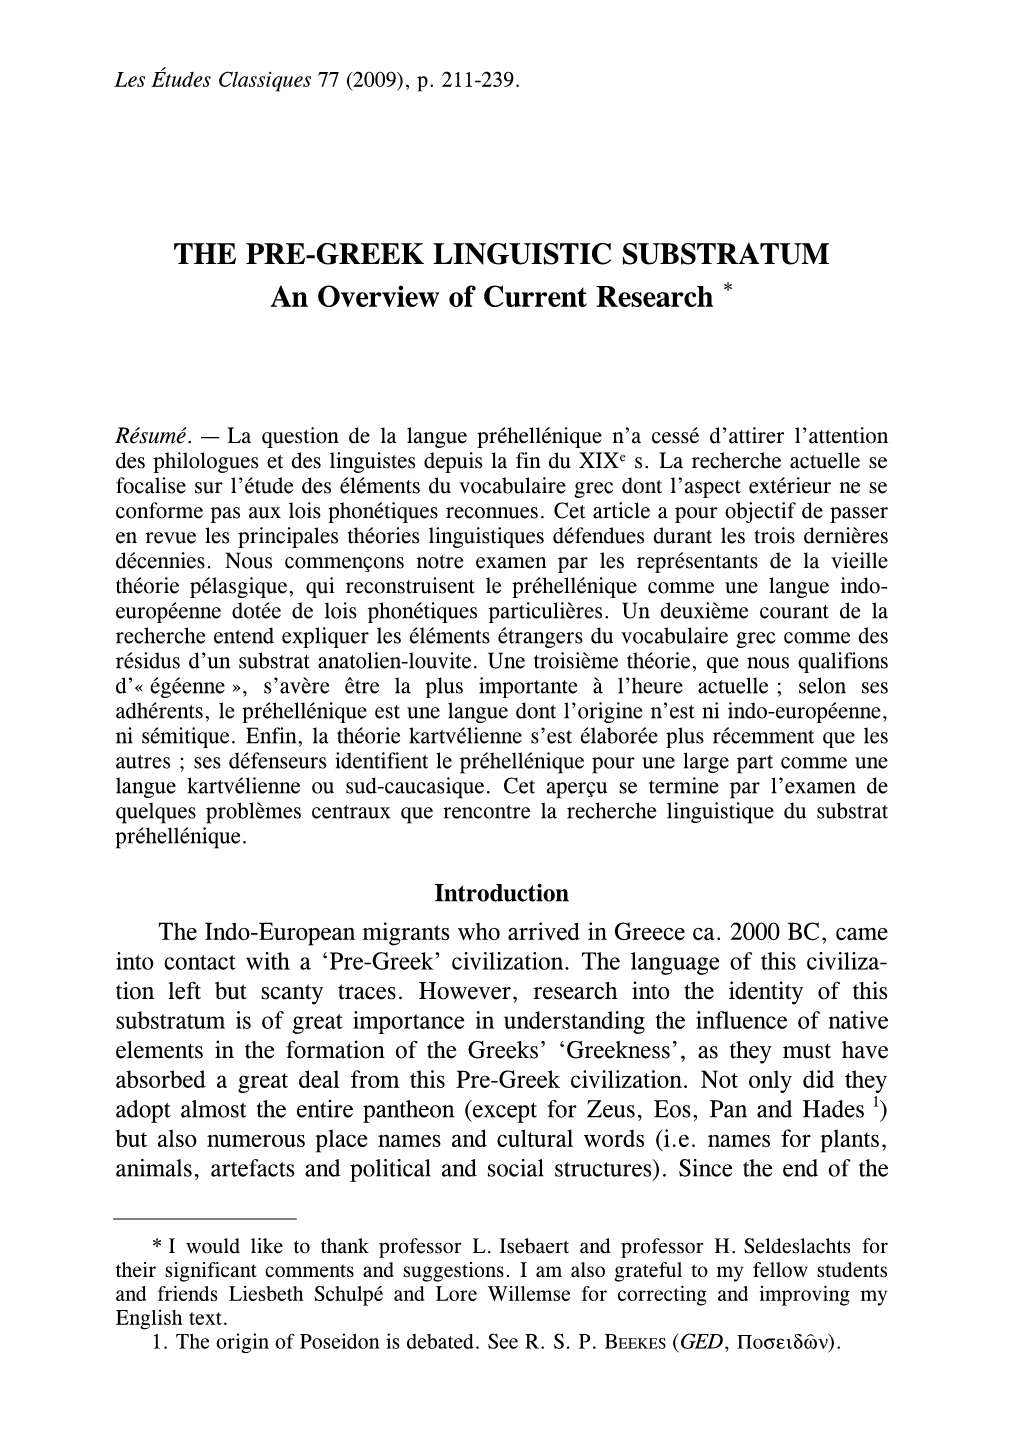 THE PRE-GREEK LINGUISTIC SUBSTRATUM an Overview of Current Research *